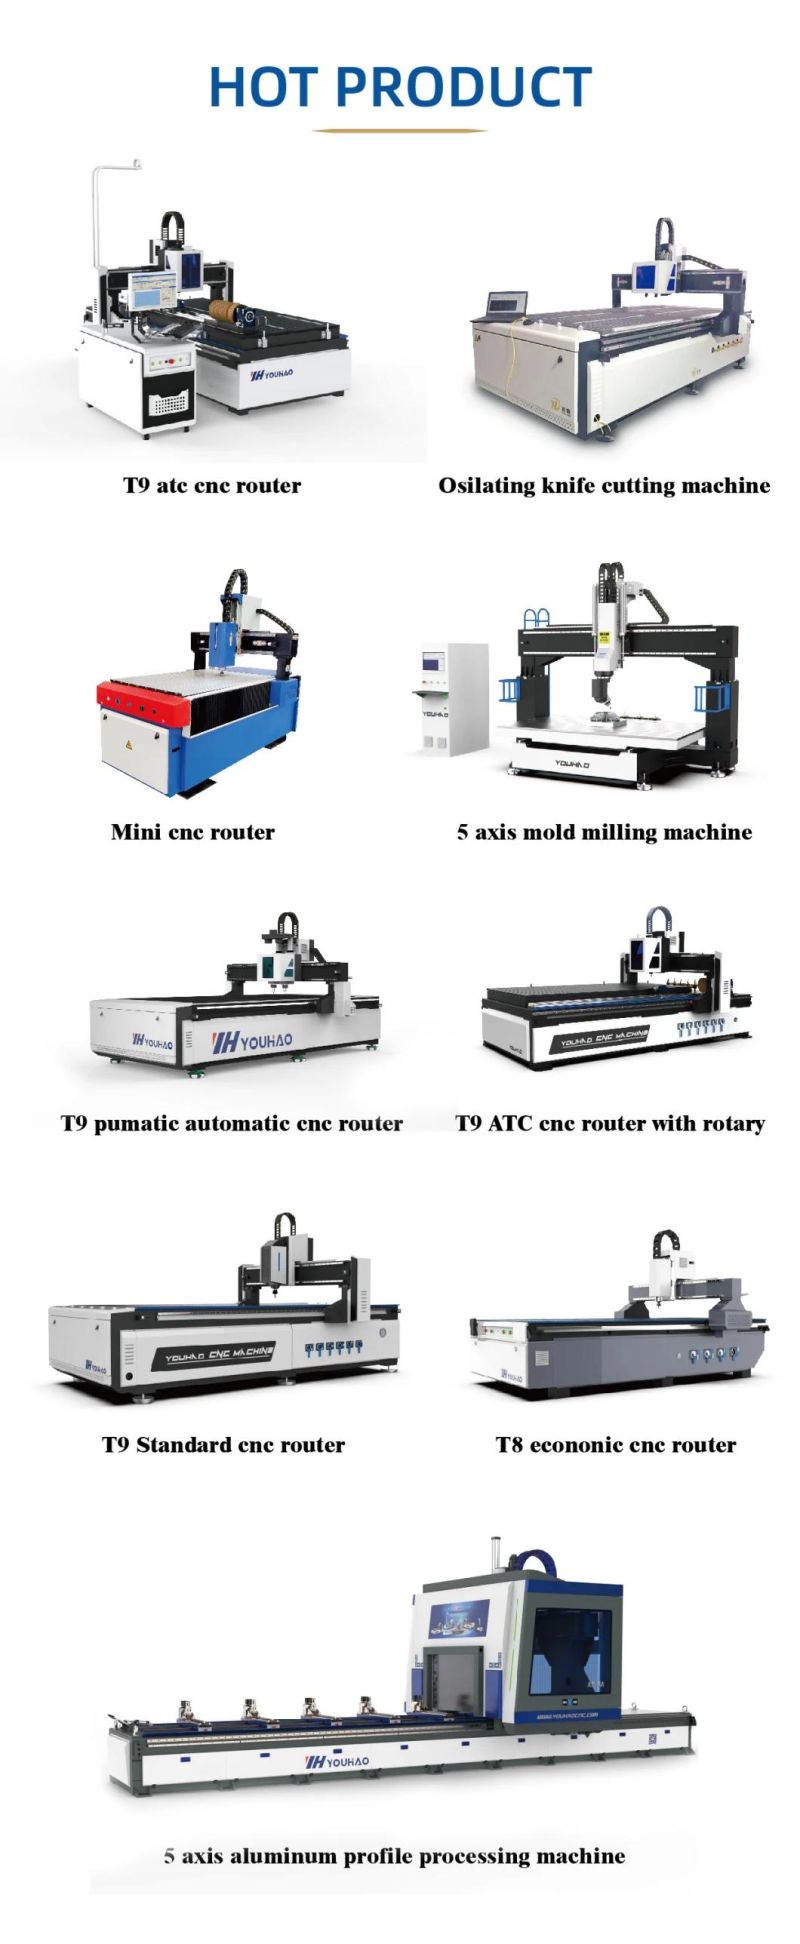 Youhao Window Making Machine and Drilling Machine for Sale